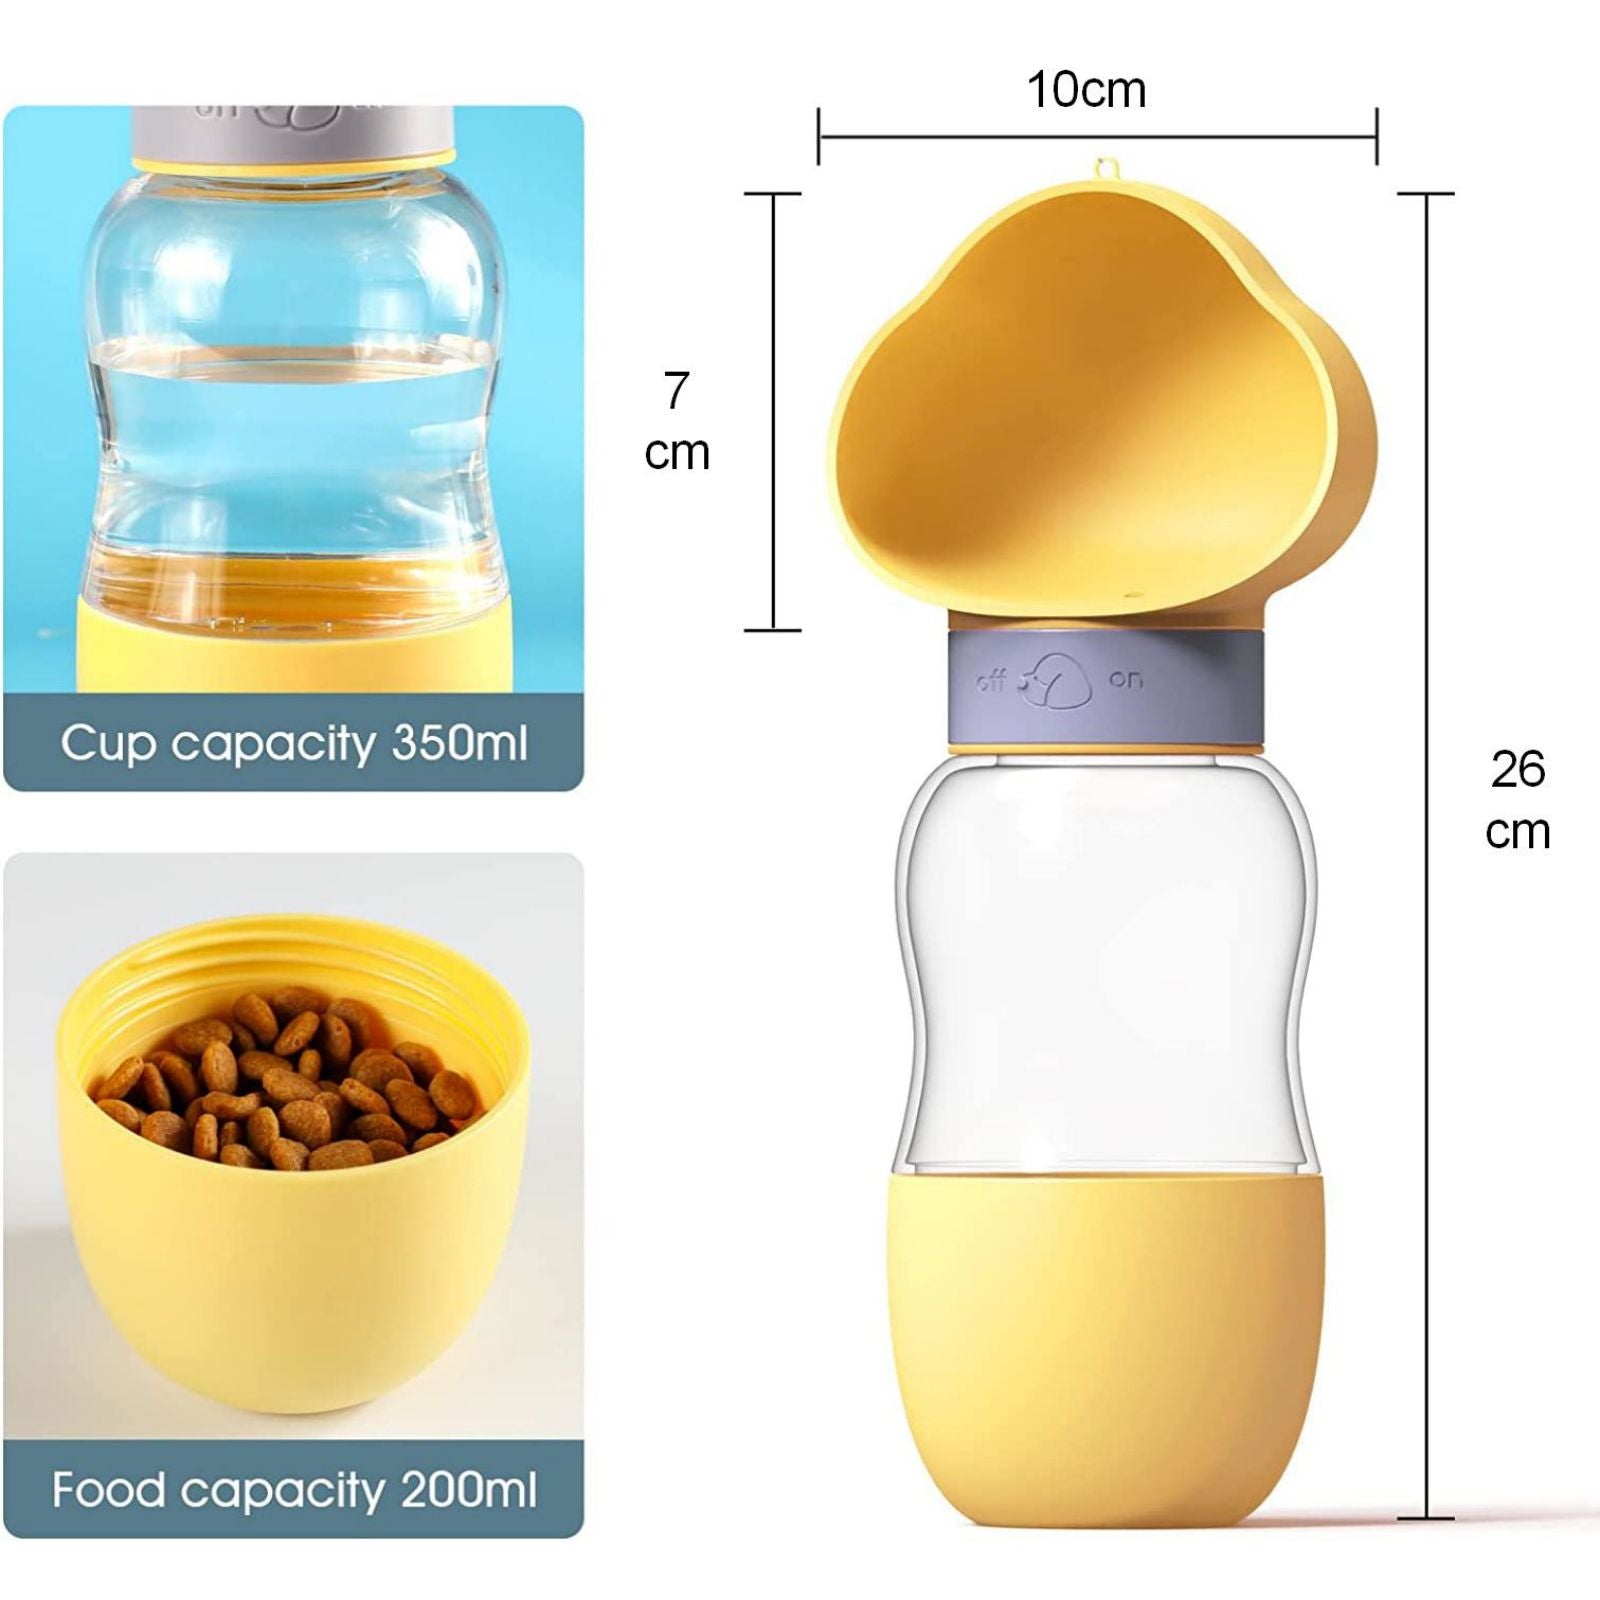 Portable Dog Water Bottle with Food Container Leak Proof Dog Travel Water Dispenser for Walking, Hiking and Travel